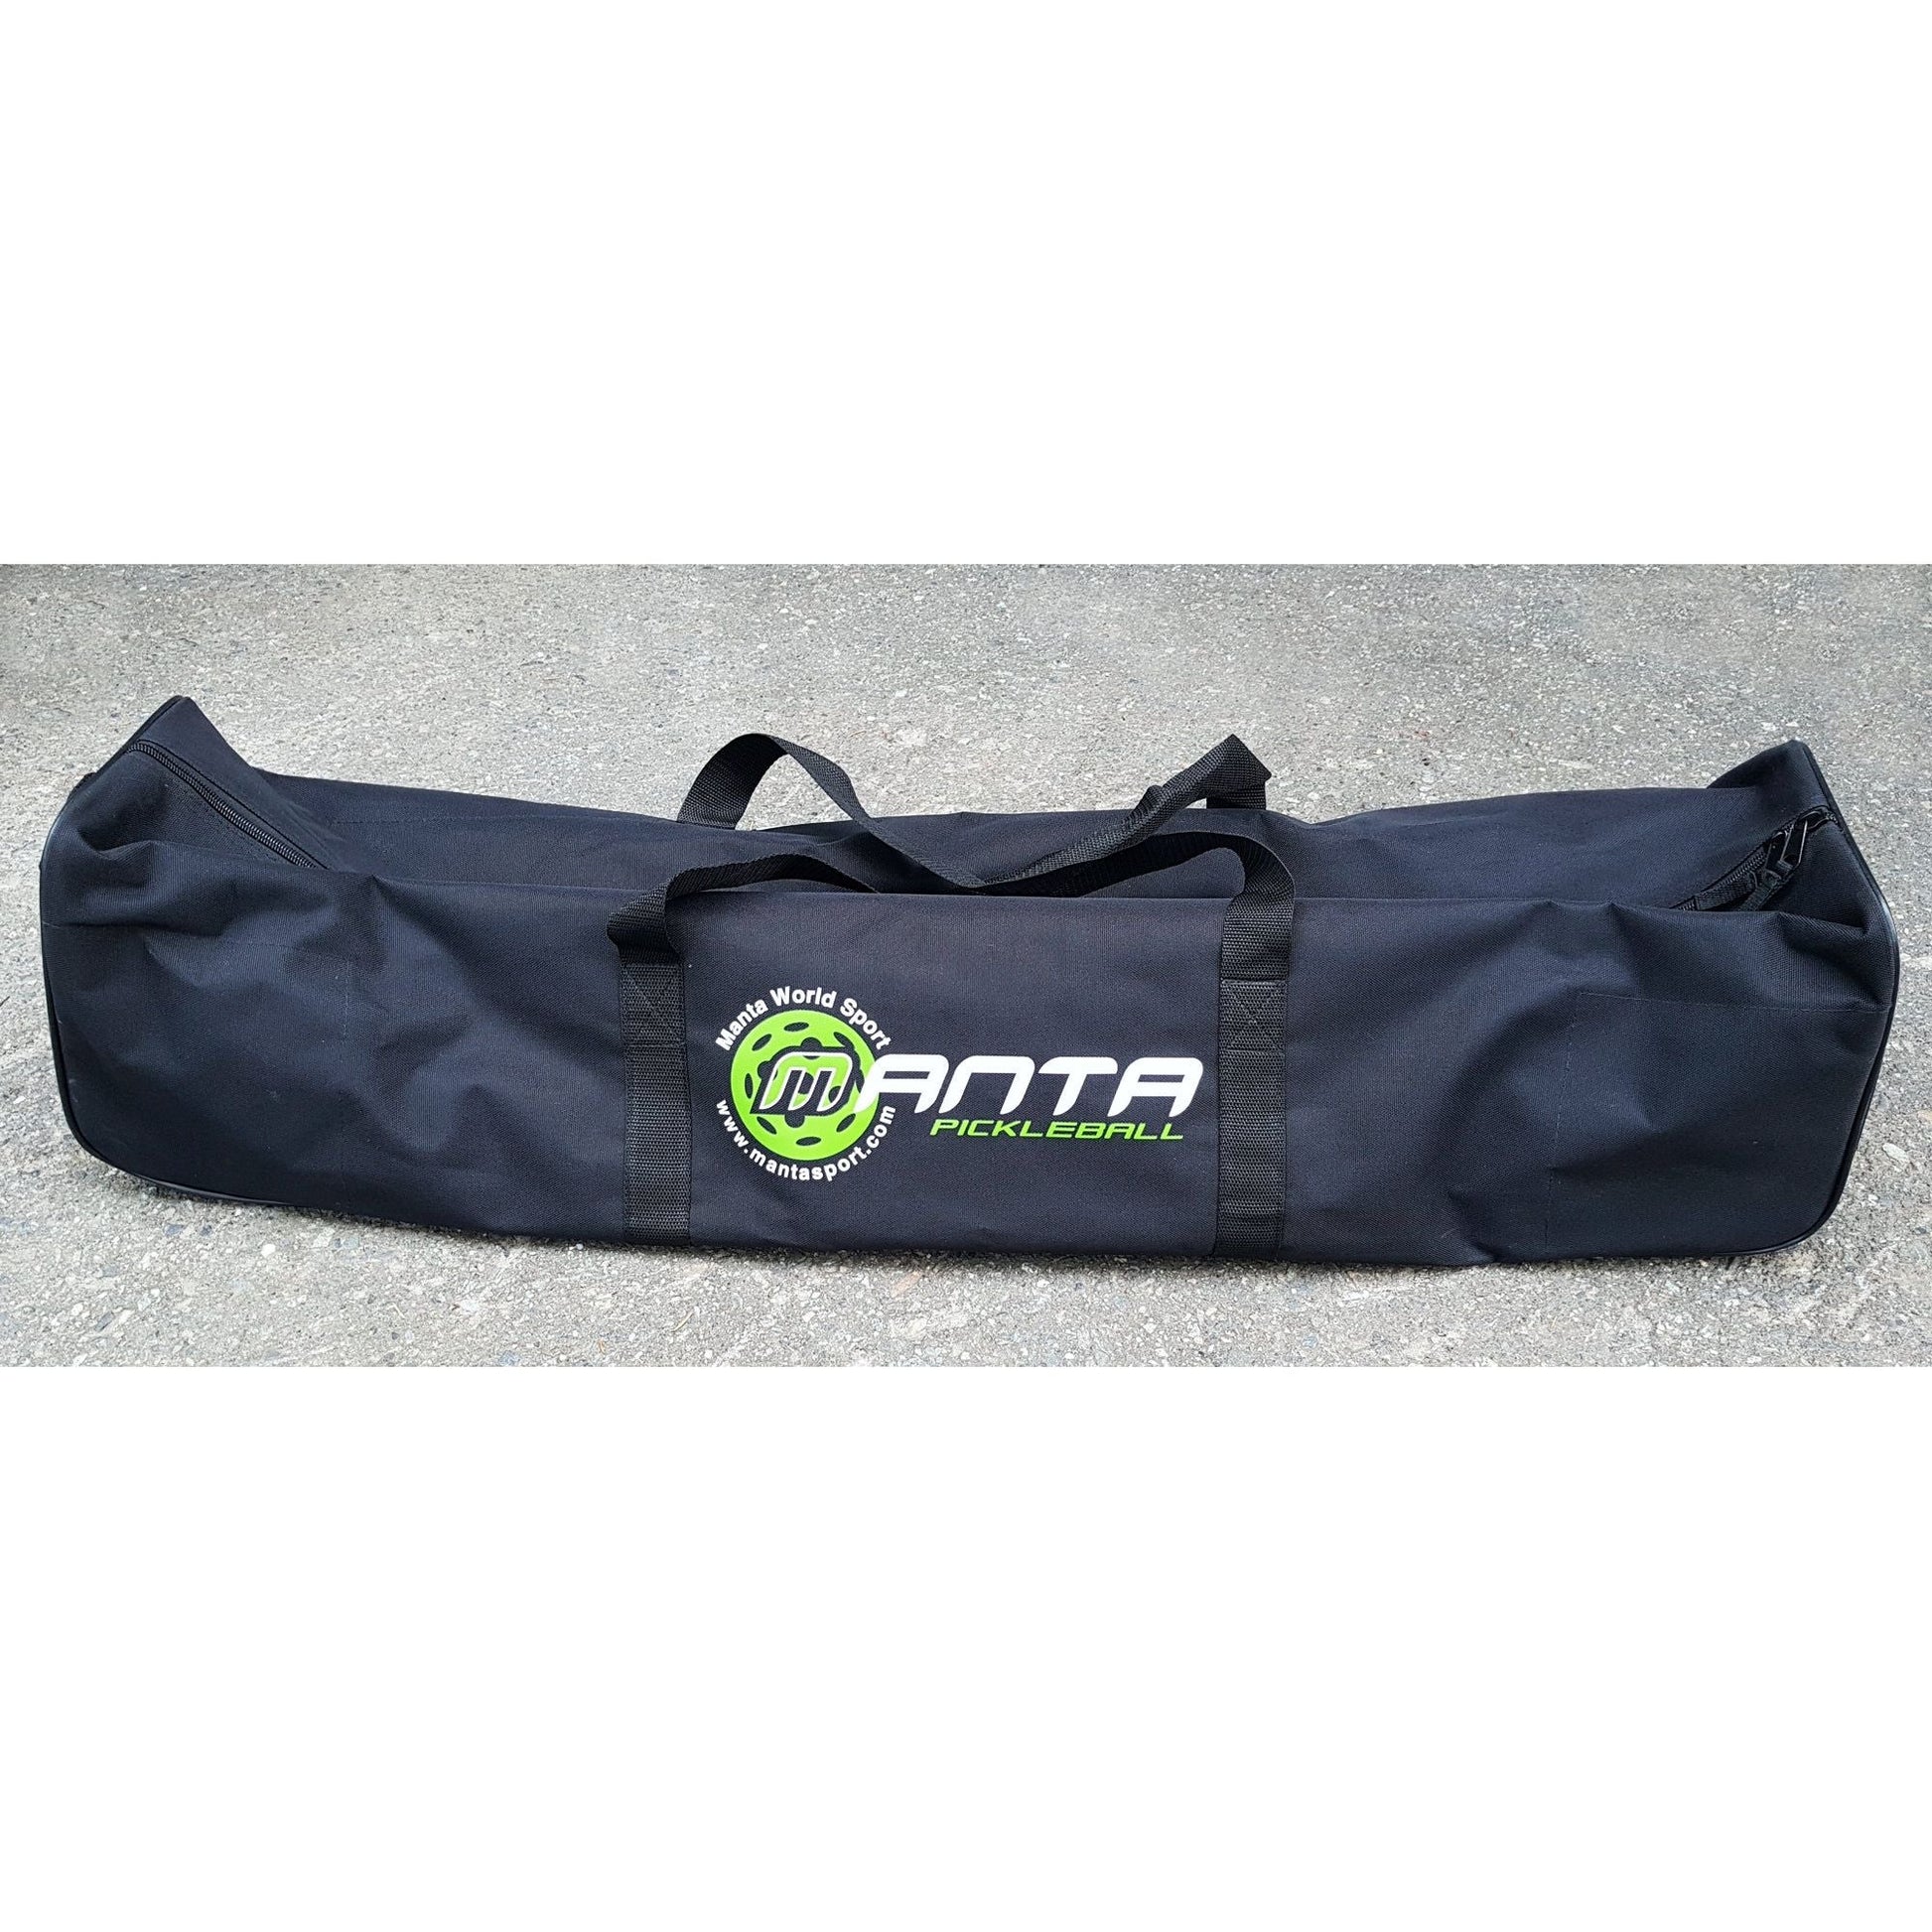 NET REPLACEMENT BAG - Grip On Golf & Pickleball Zone